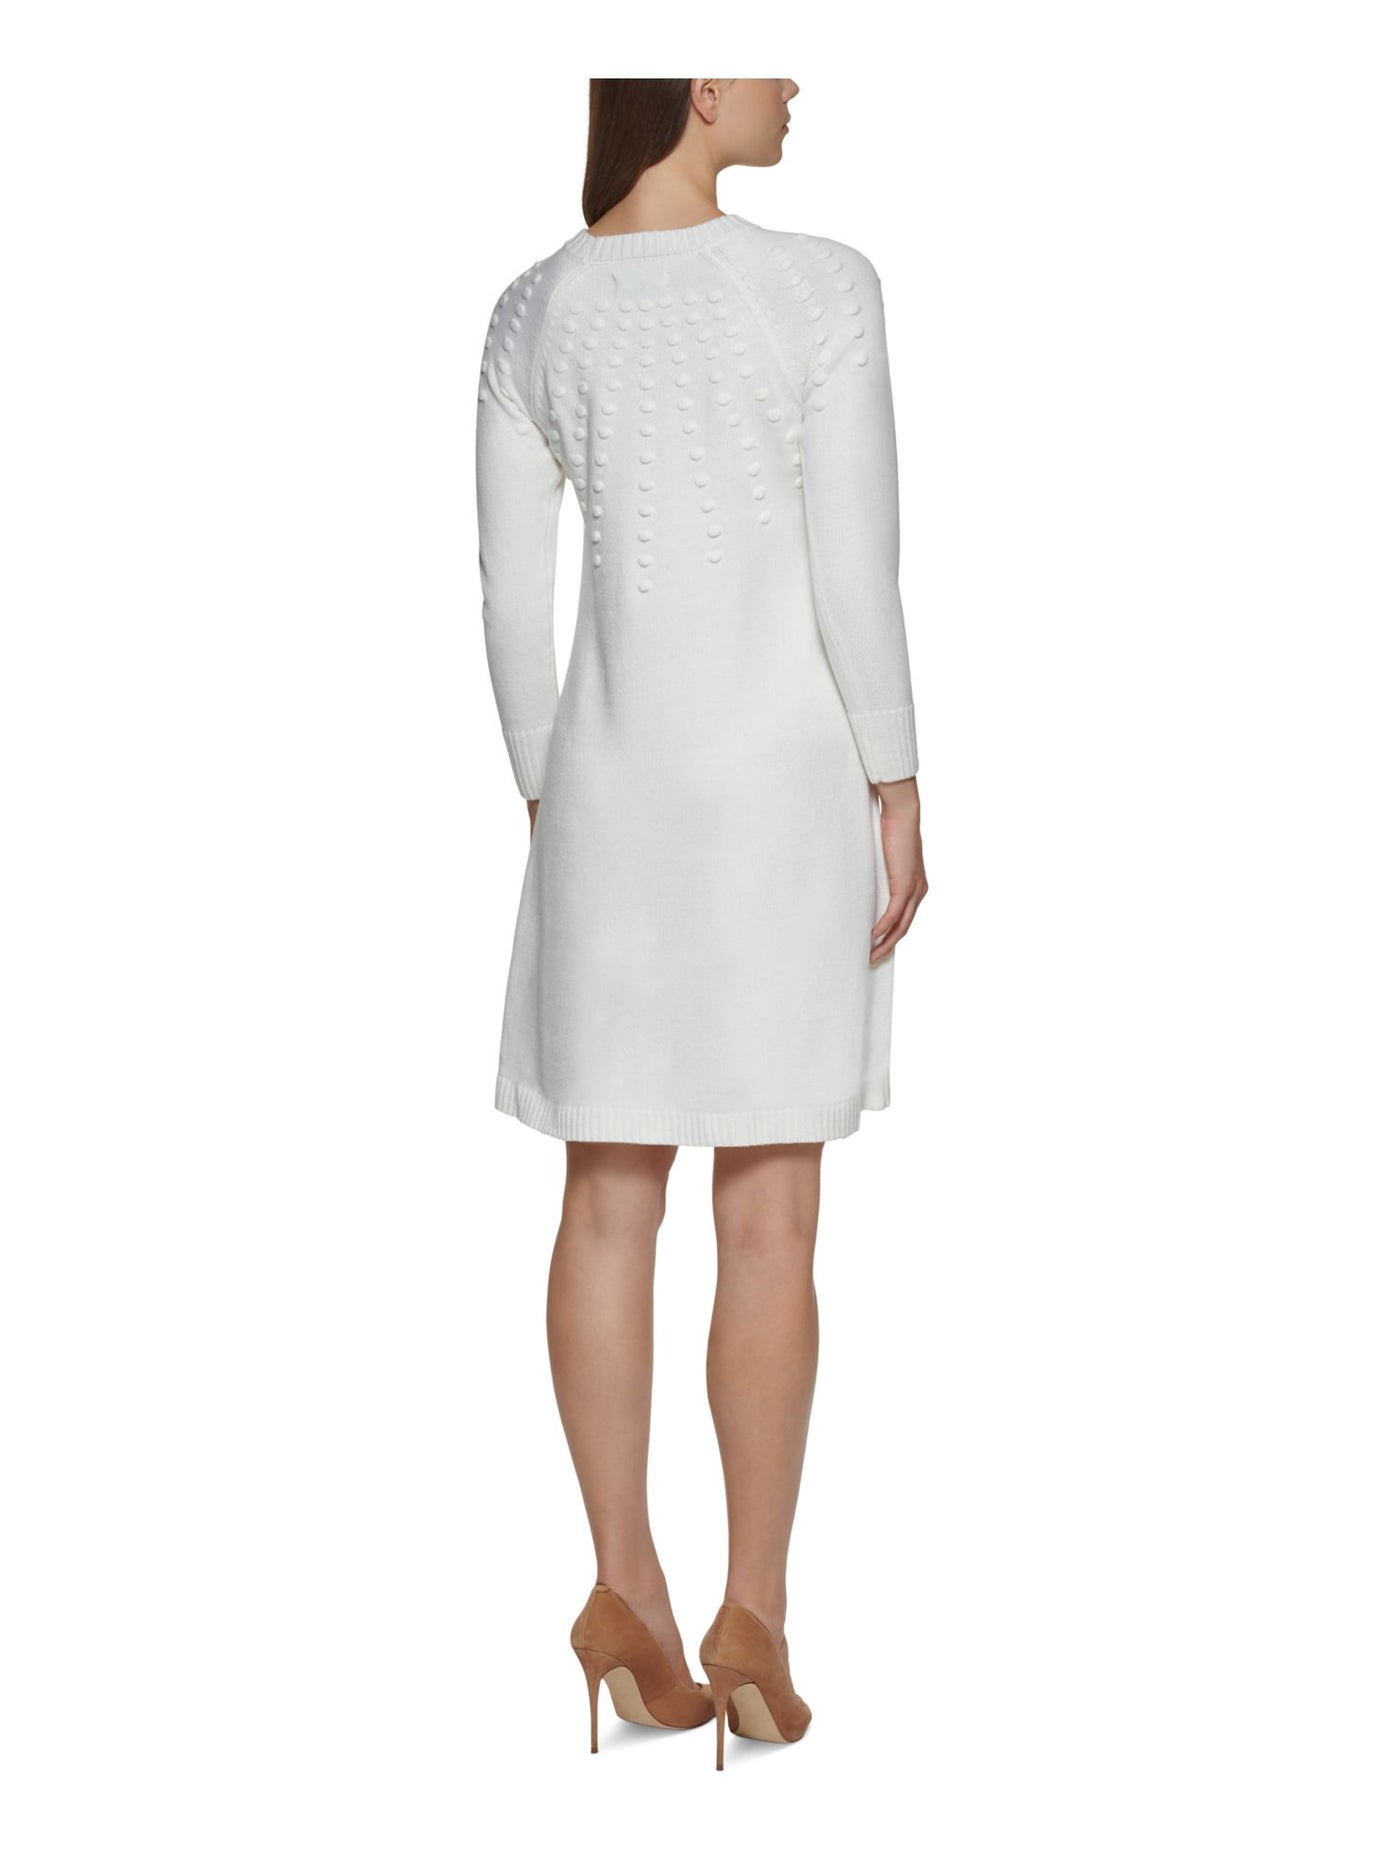 JESSICA HOWARD Womens Ivory Textured Sweater Long Sleeve Crew Neck Above The Knee Shift Dress Petites PXL